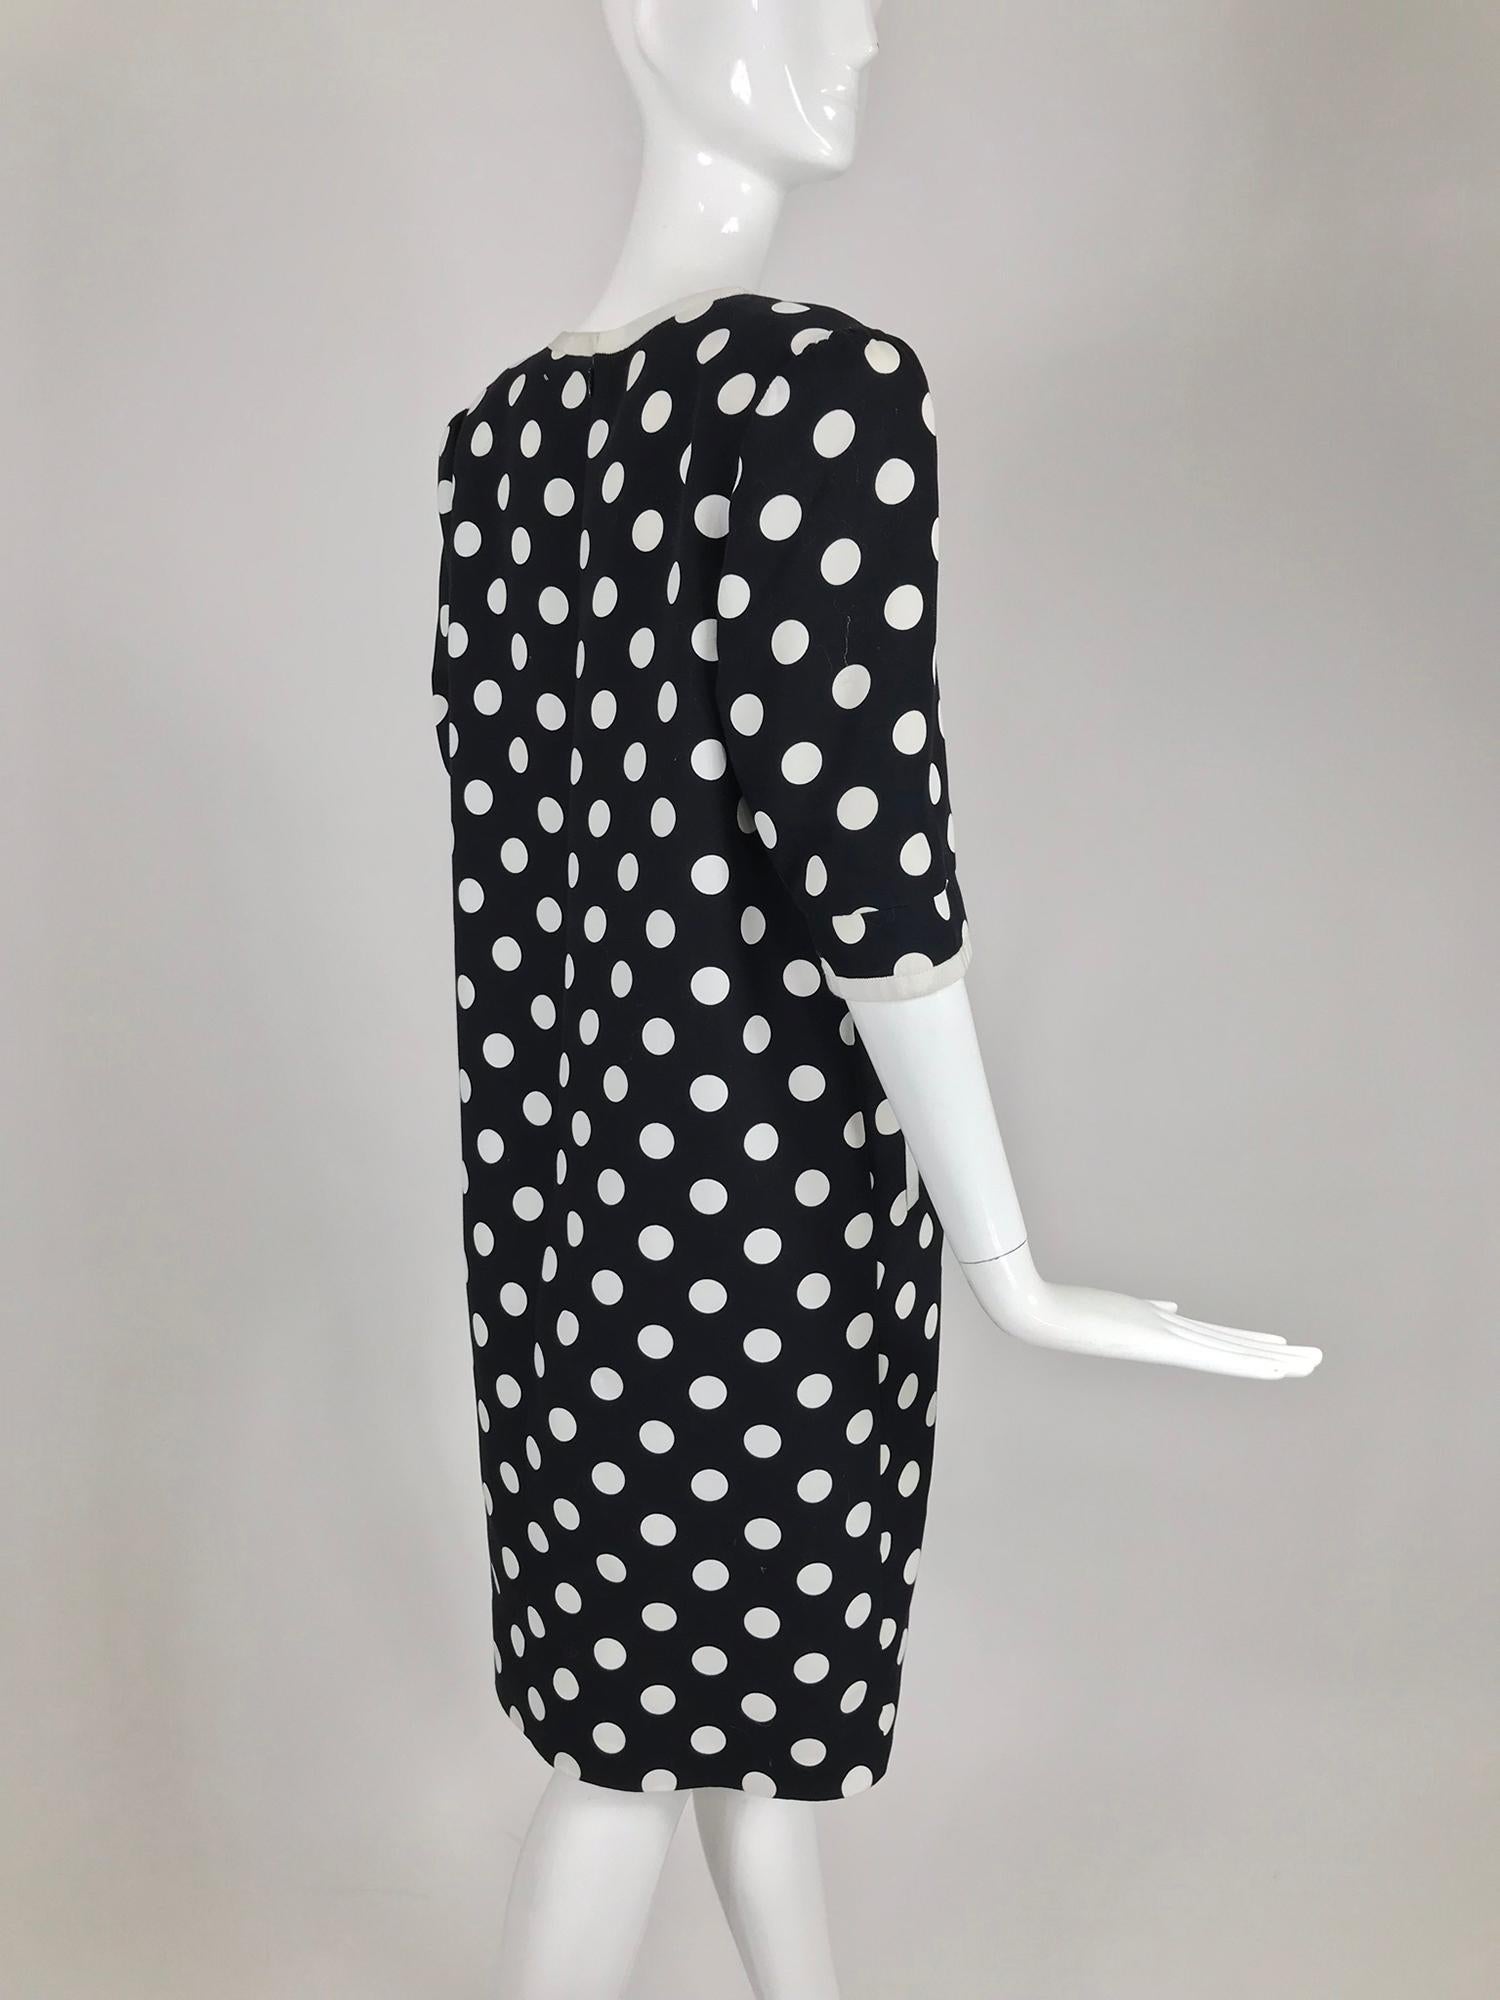 Givenchy Couture Black and White Cotton Polka Dot Day Dress 1980s For Sale 2